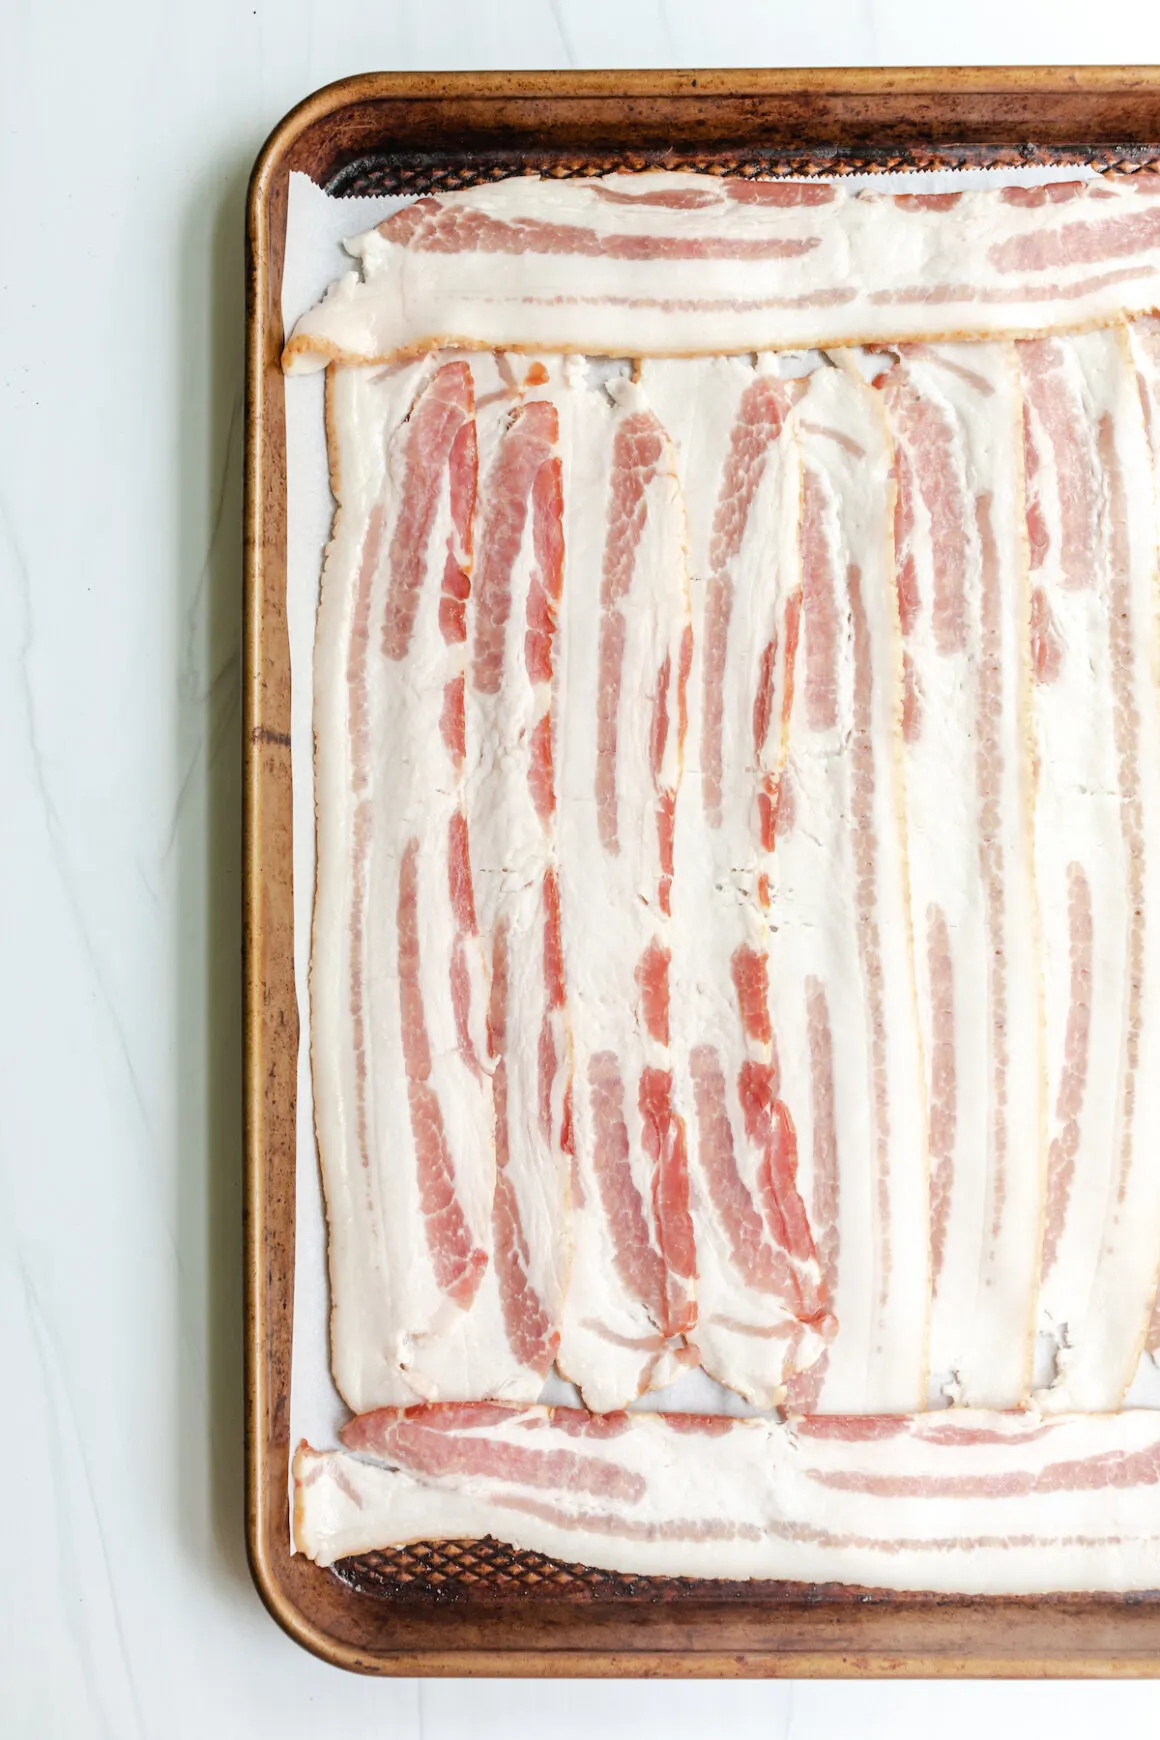 Thick cut bacon on a baking sheet with parchment paper